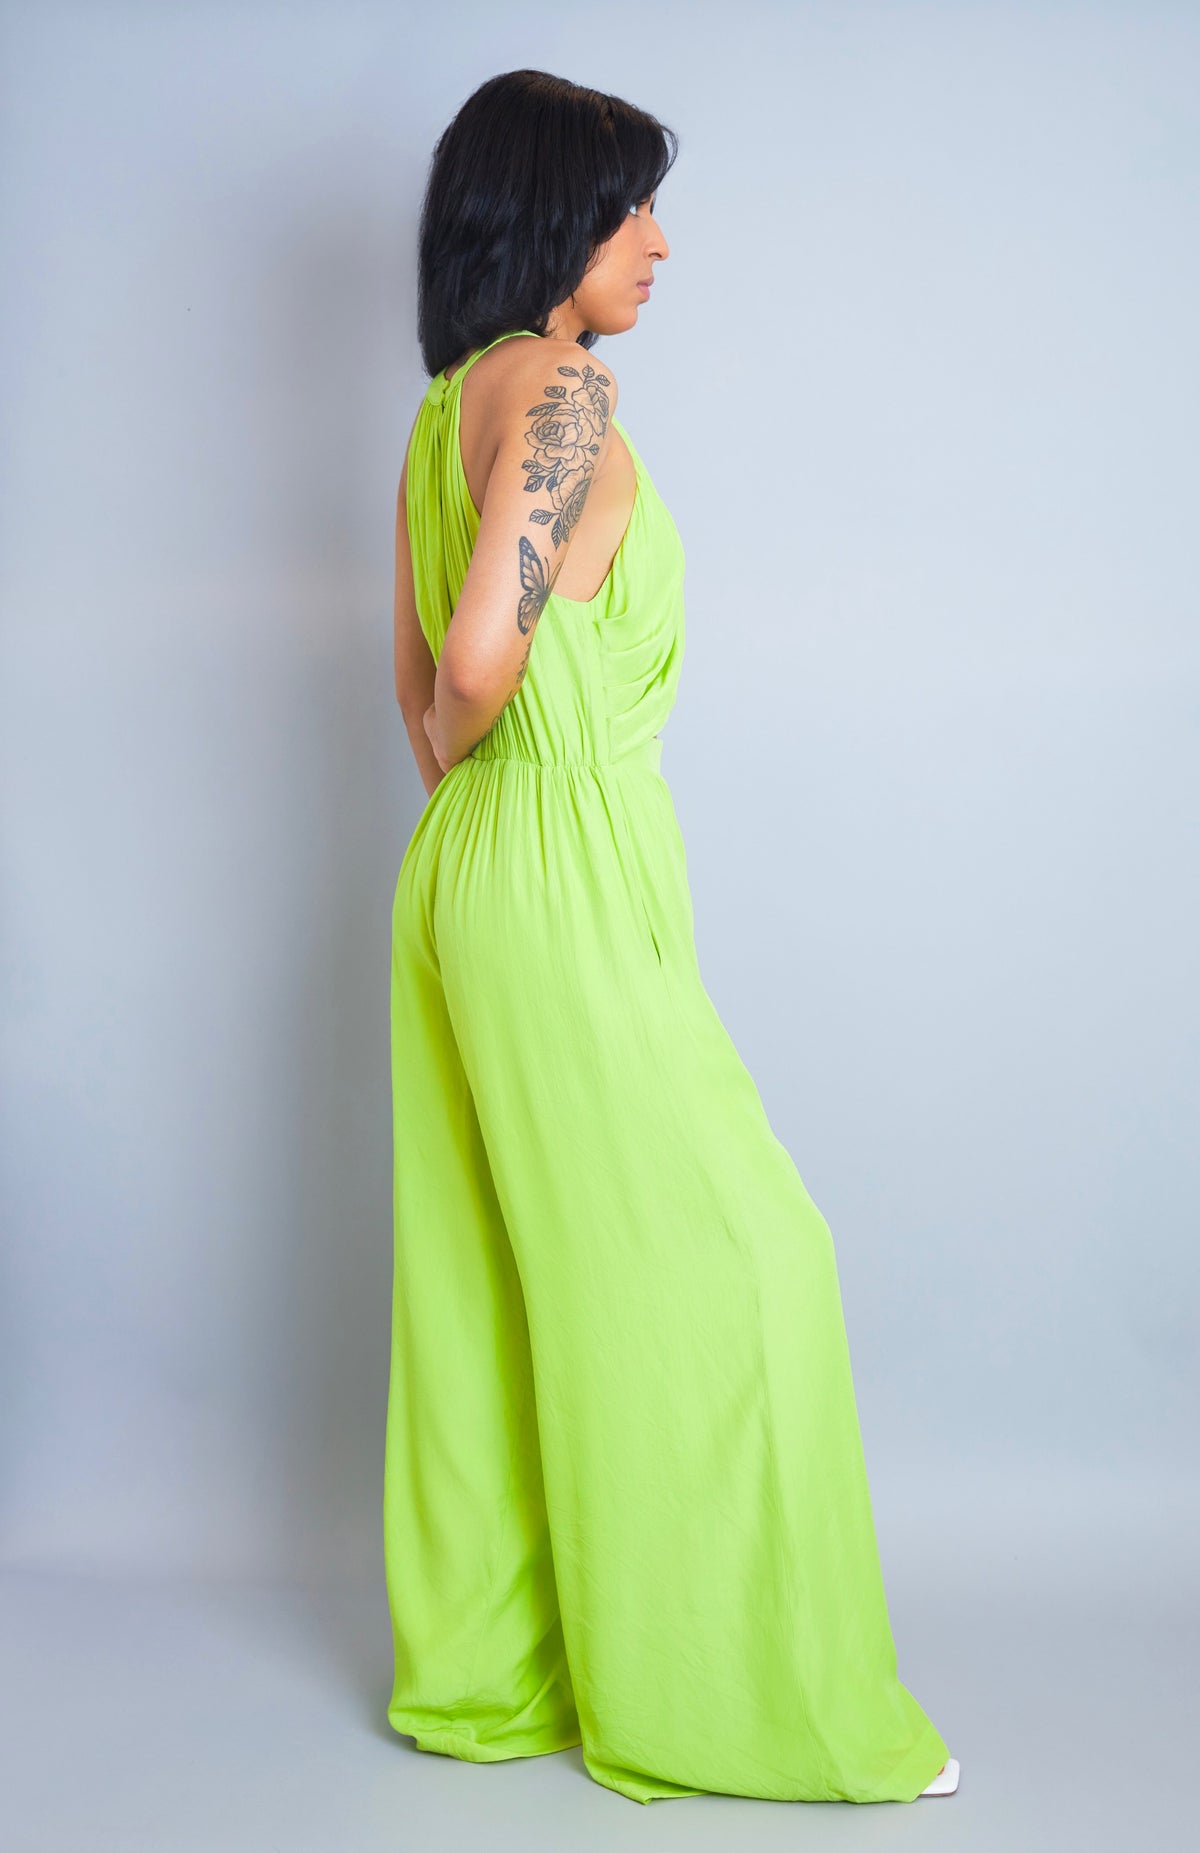 Shine Bright Lime Green Halter-Style Jumpsuit